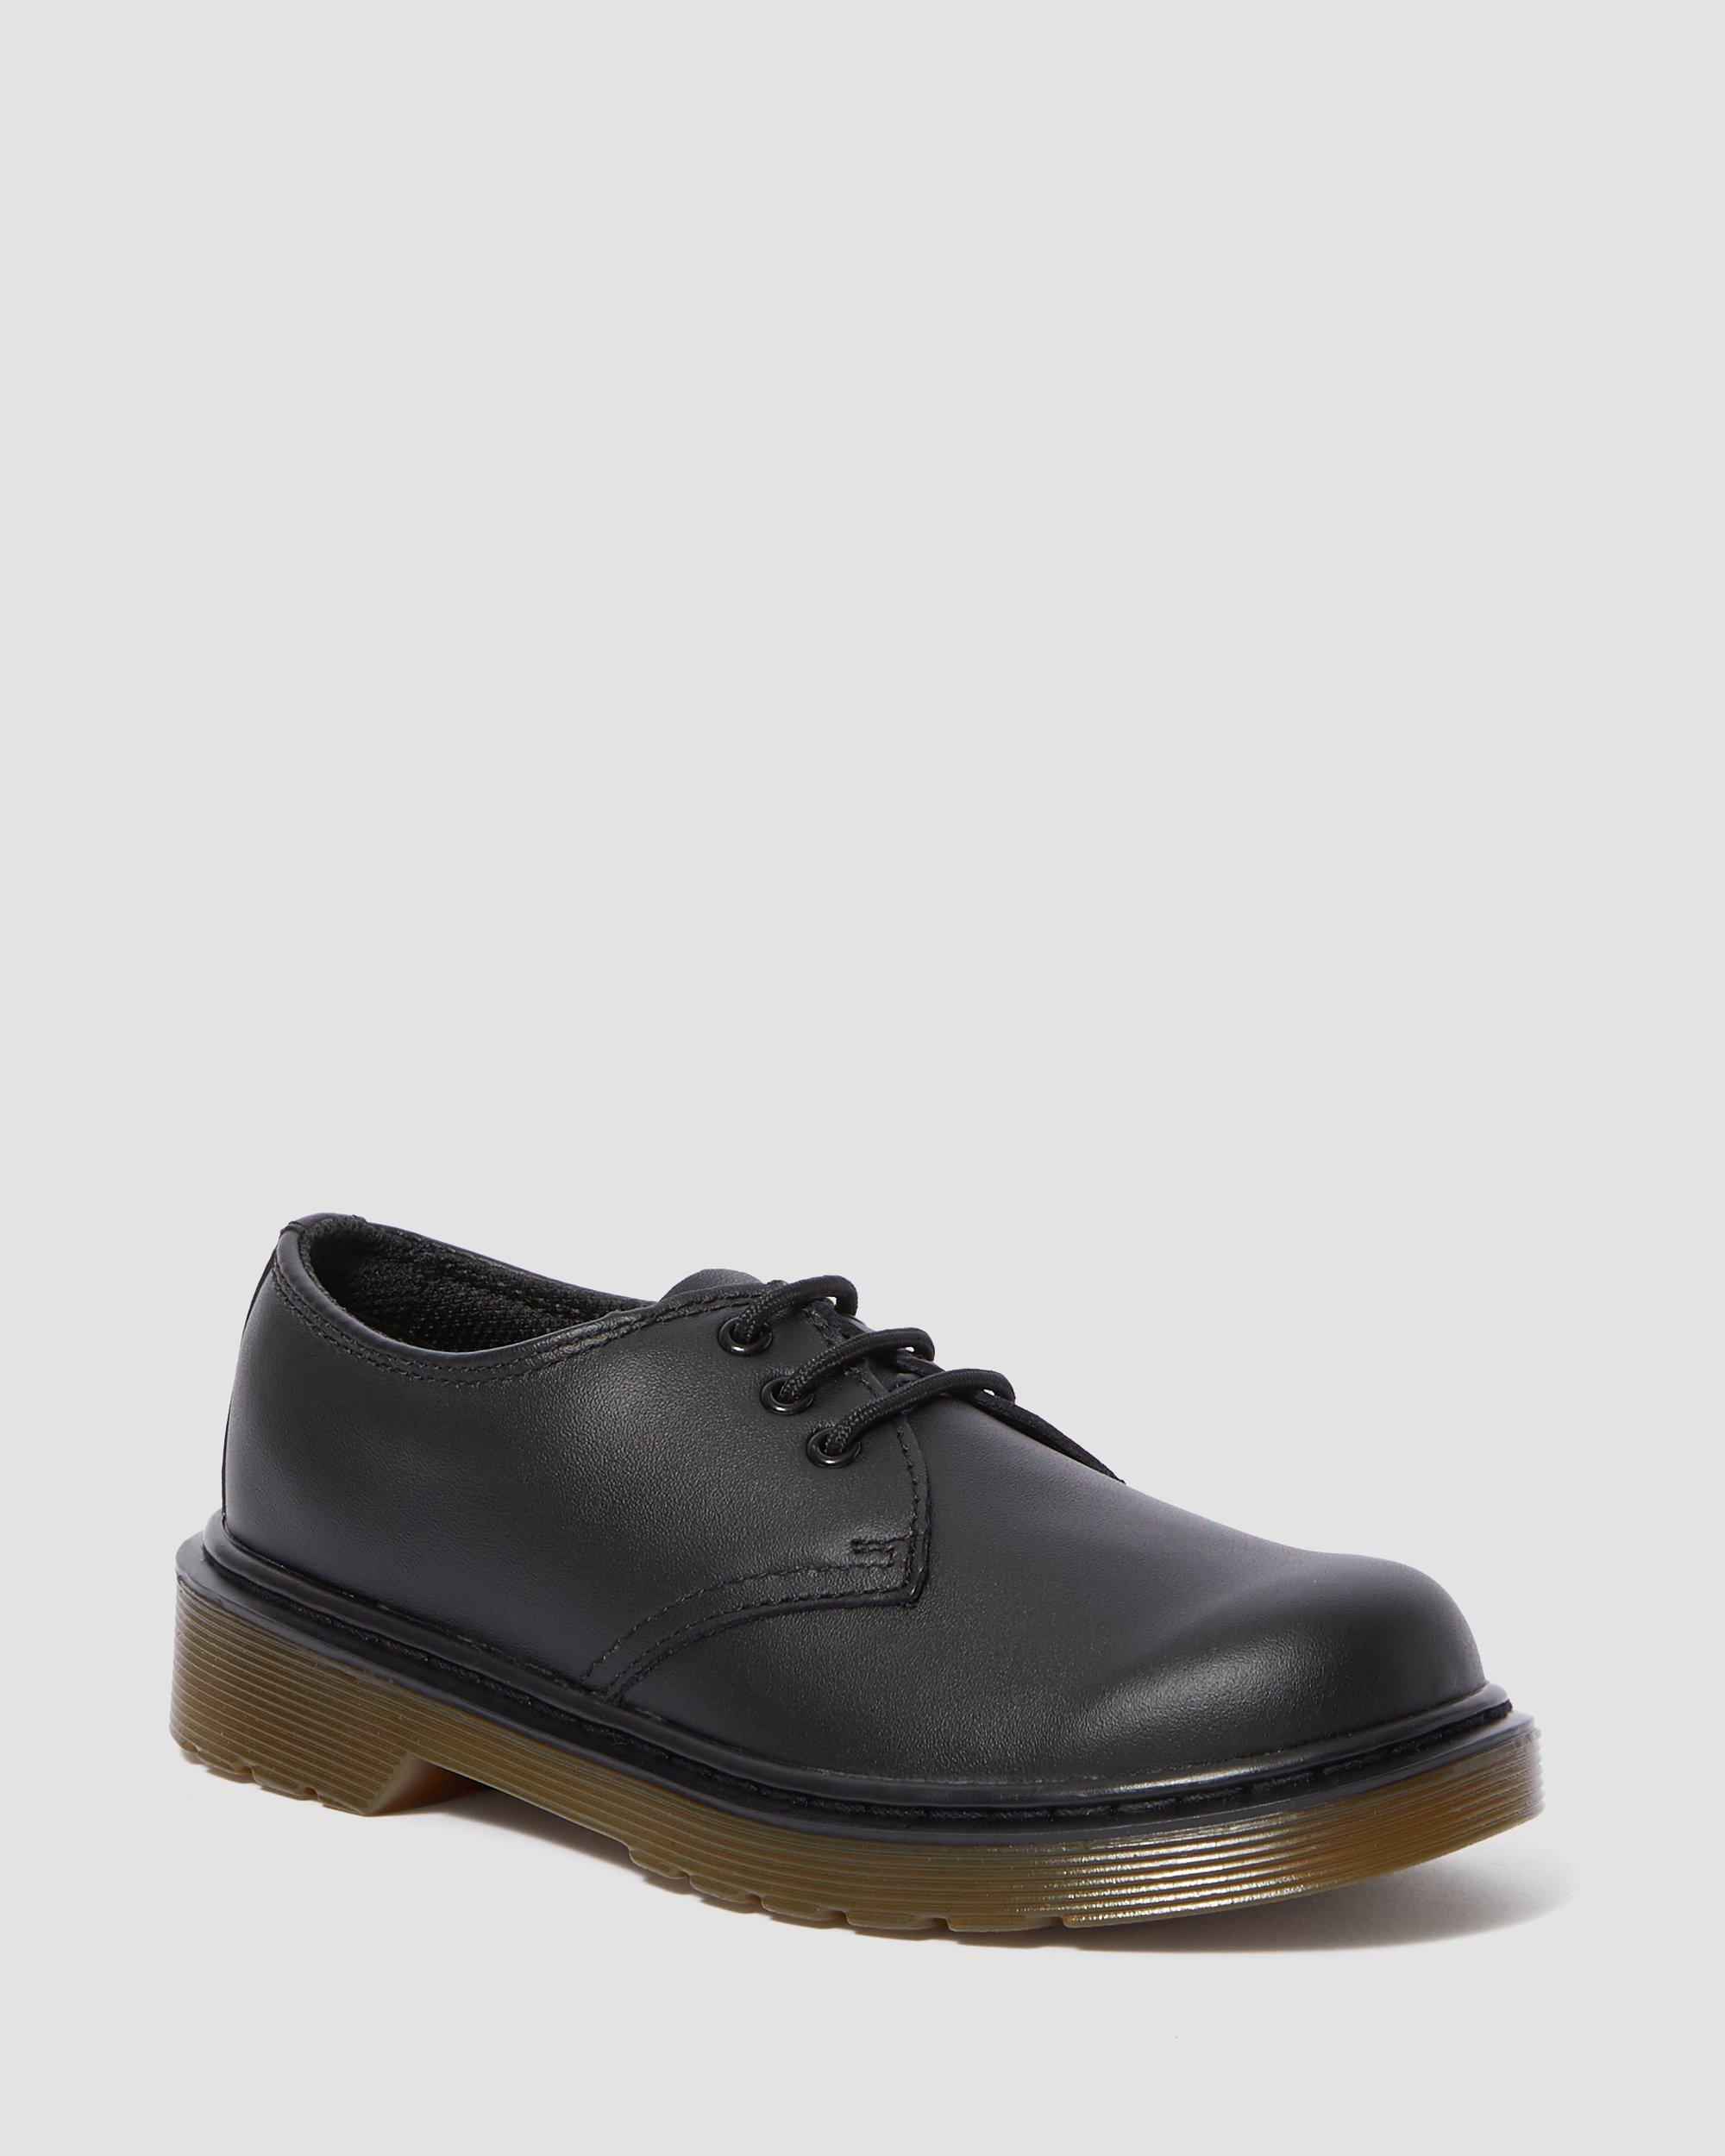 JUNIOR 1461 LEATHER OXFORD SHOES | Dr 